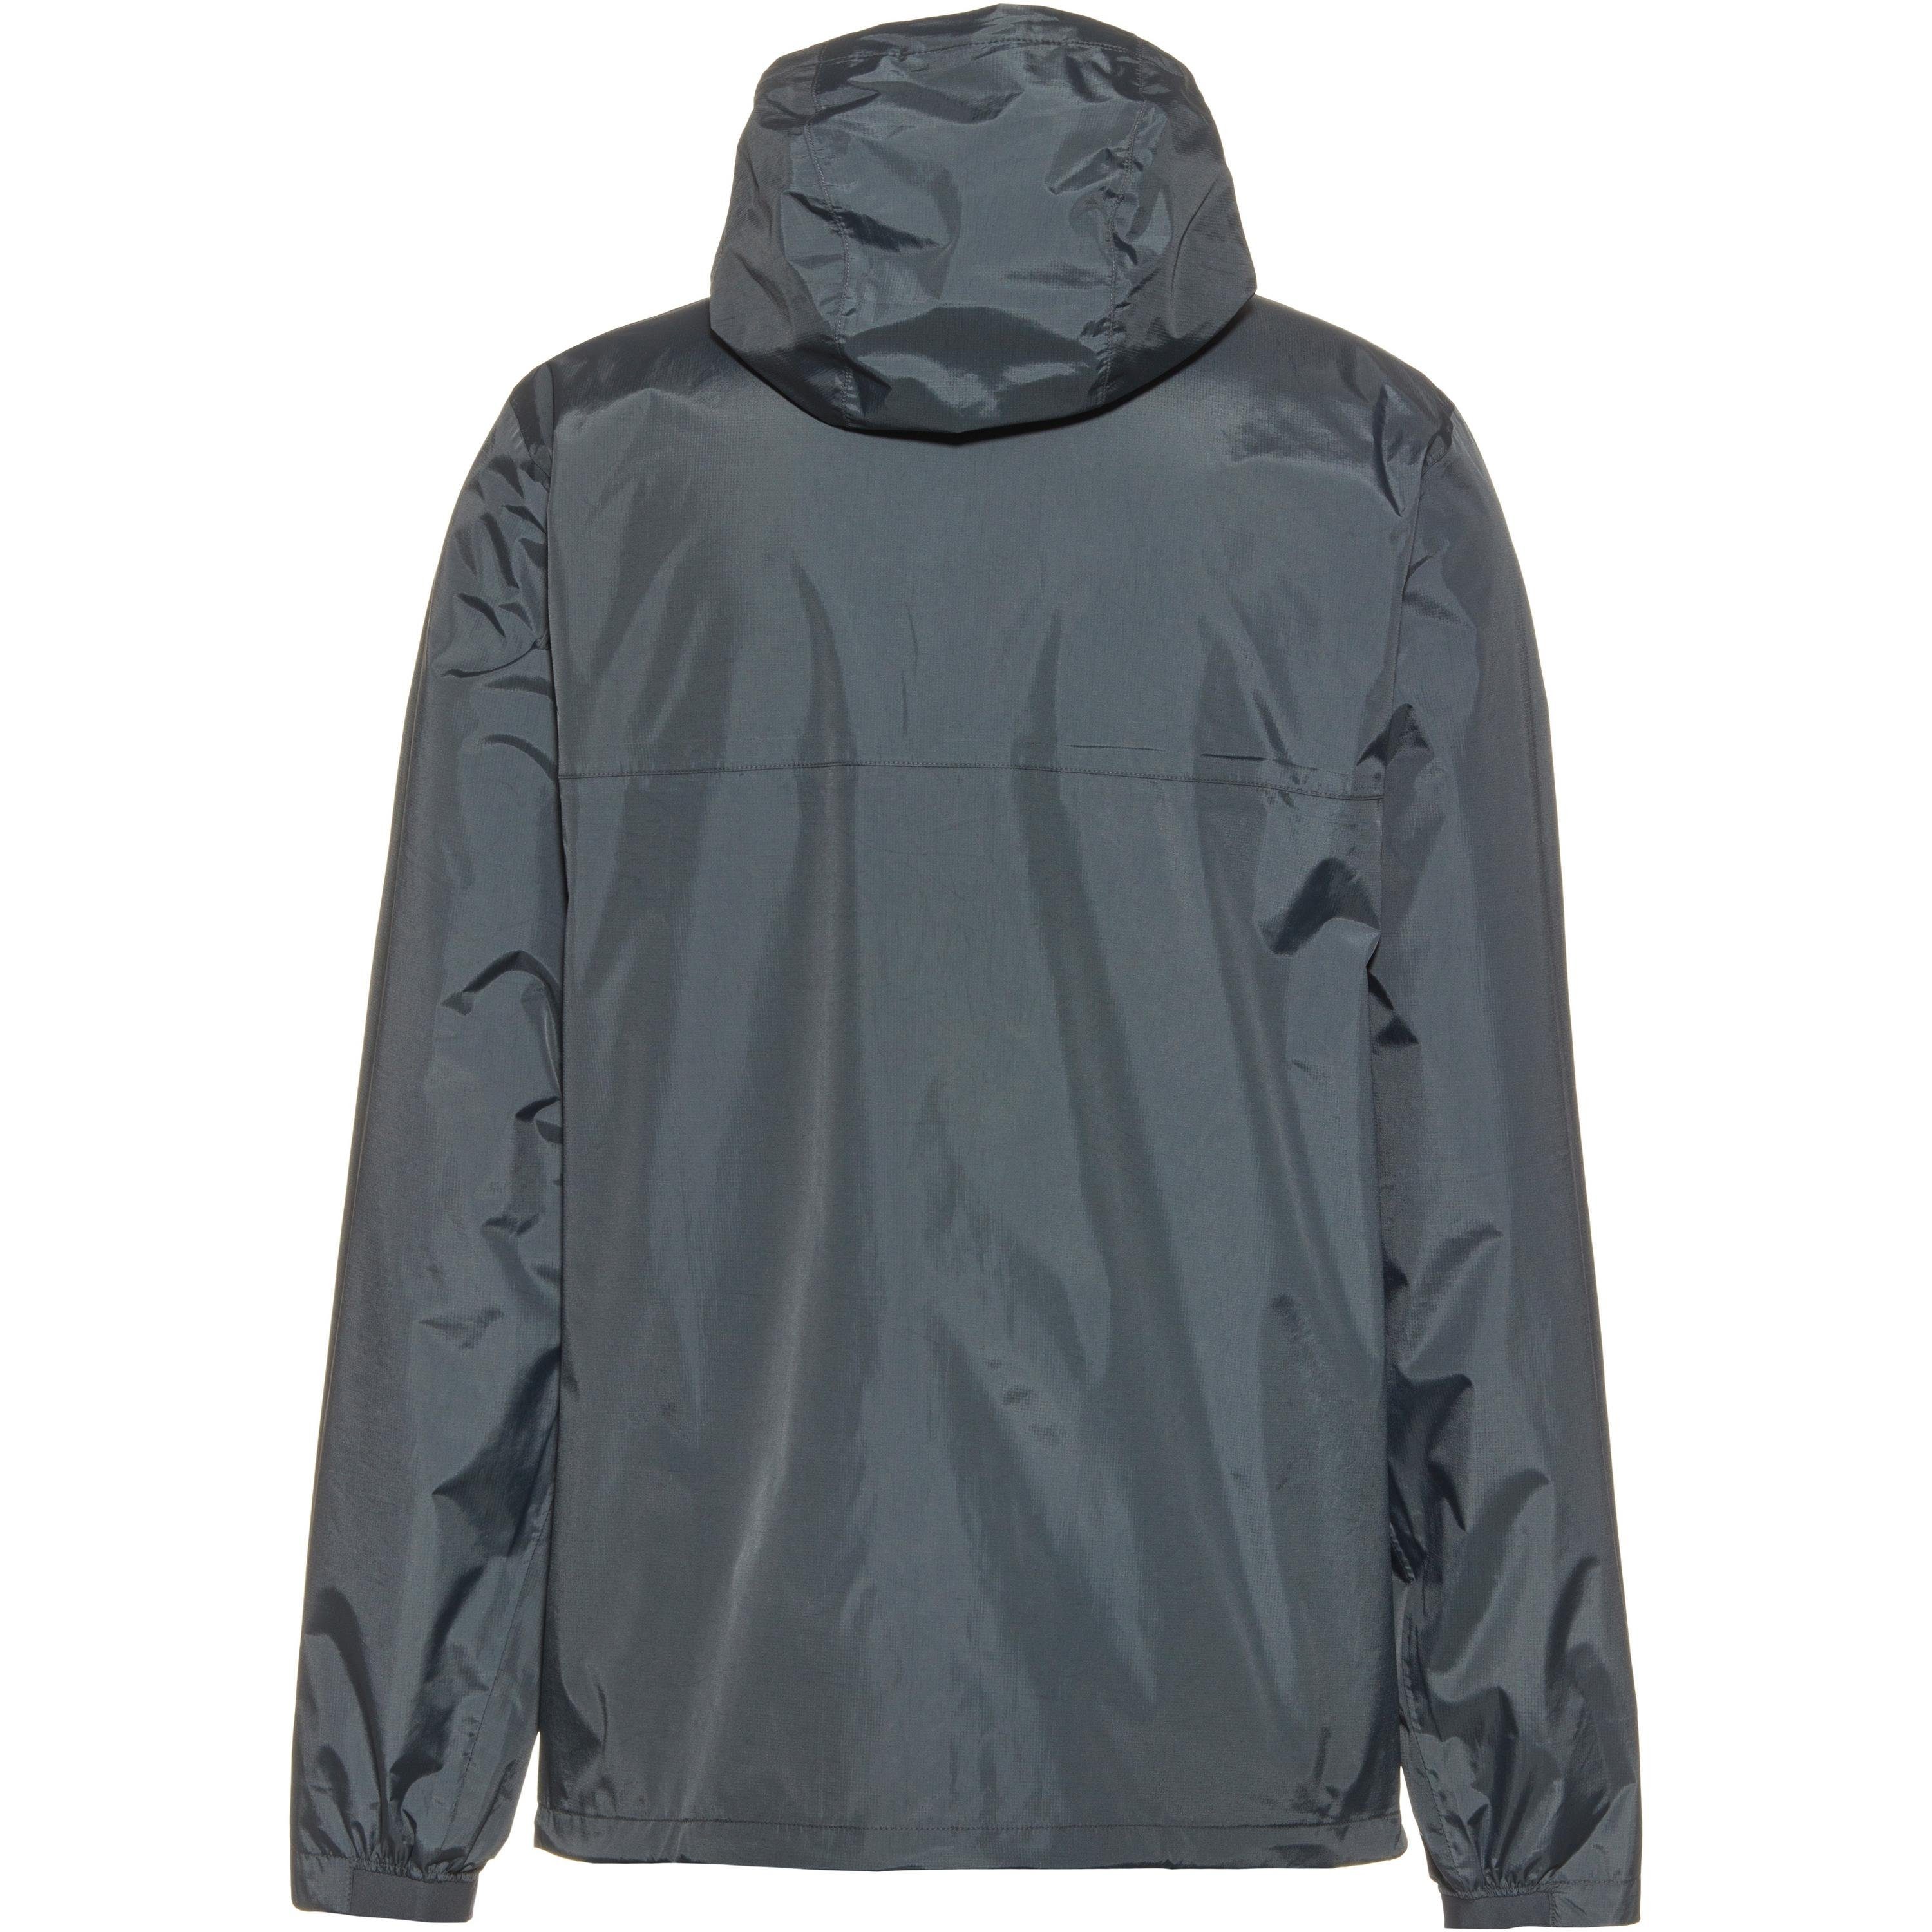 Under Armour® Funktionsjacke Cloudstrike 2.0 gray-black pitch